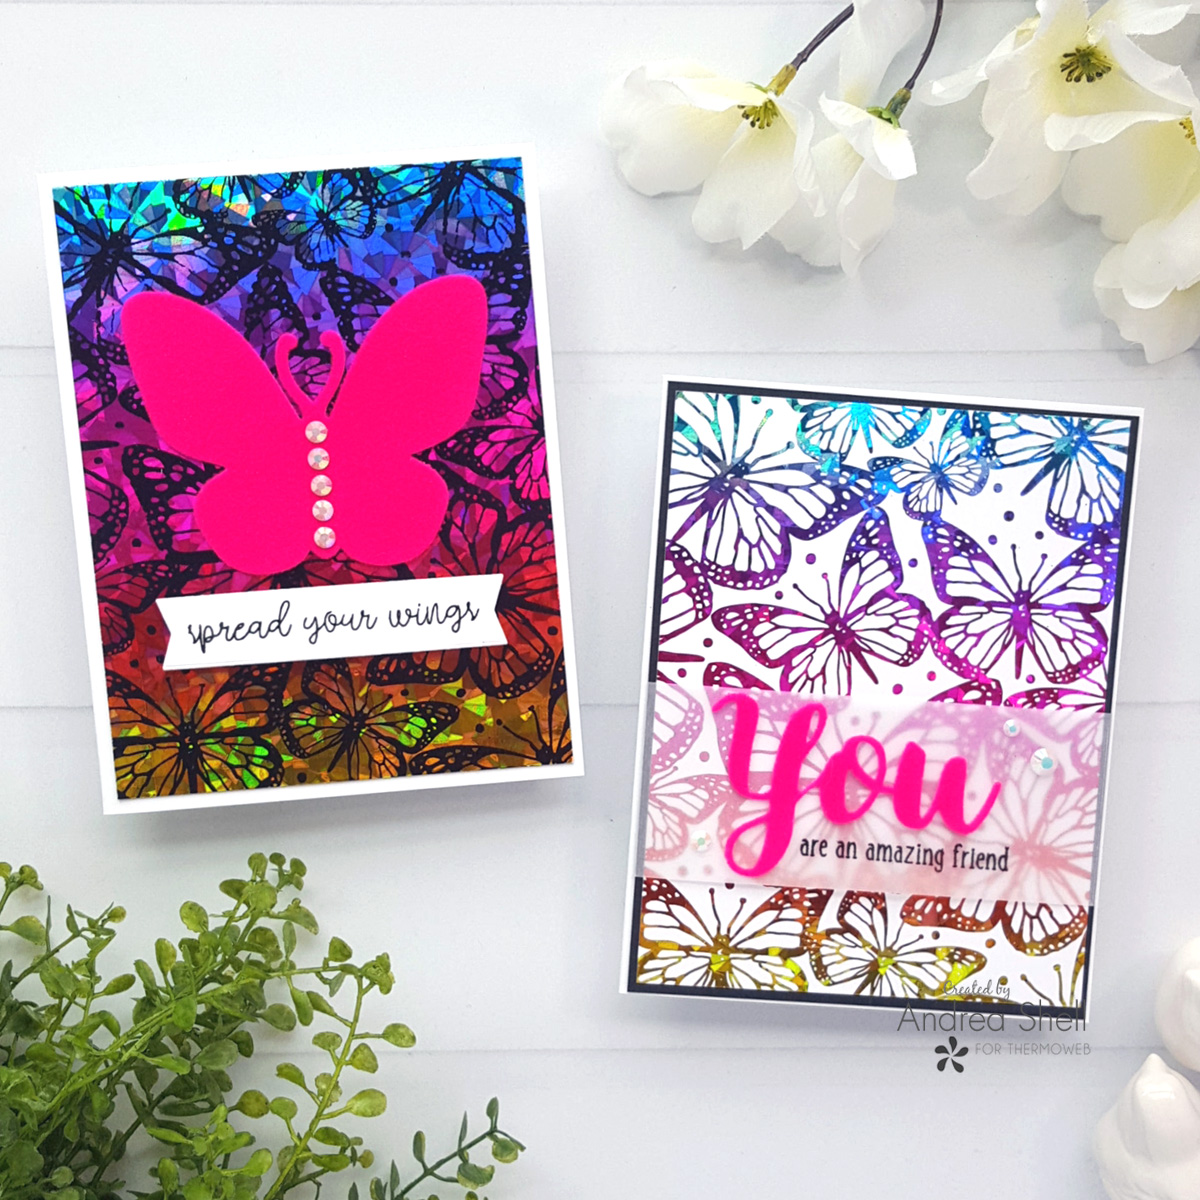 Rainbow Butterfly Cards by Andrea Shell